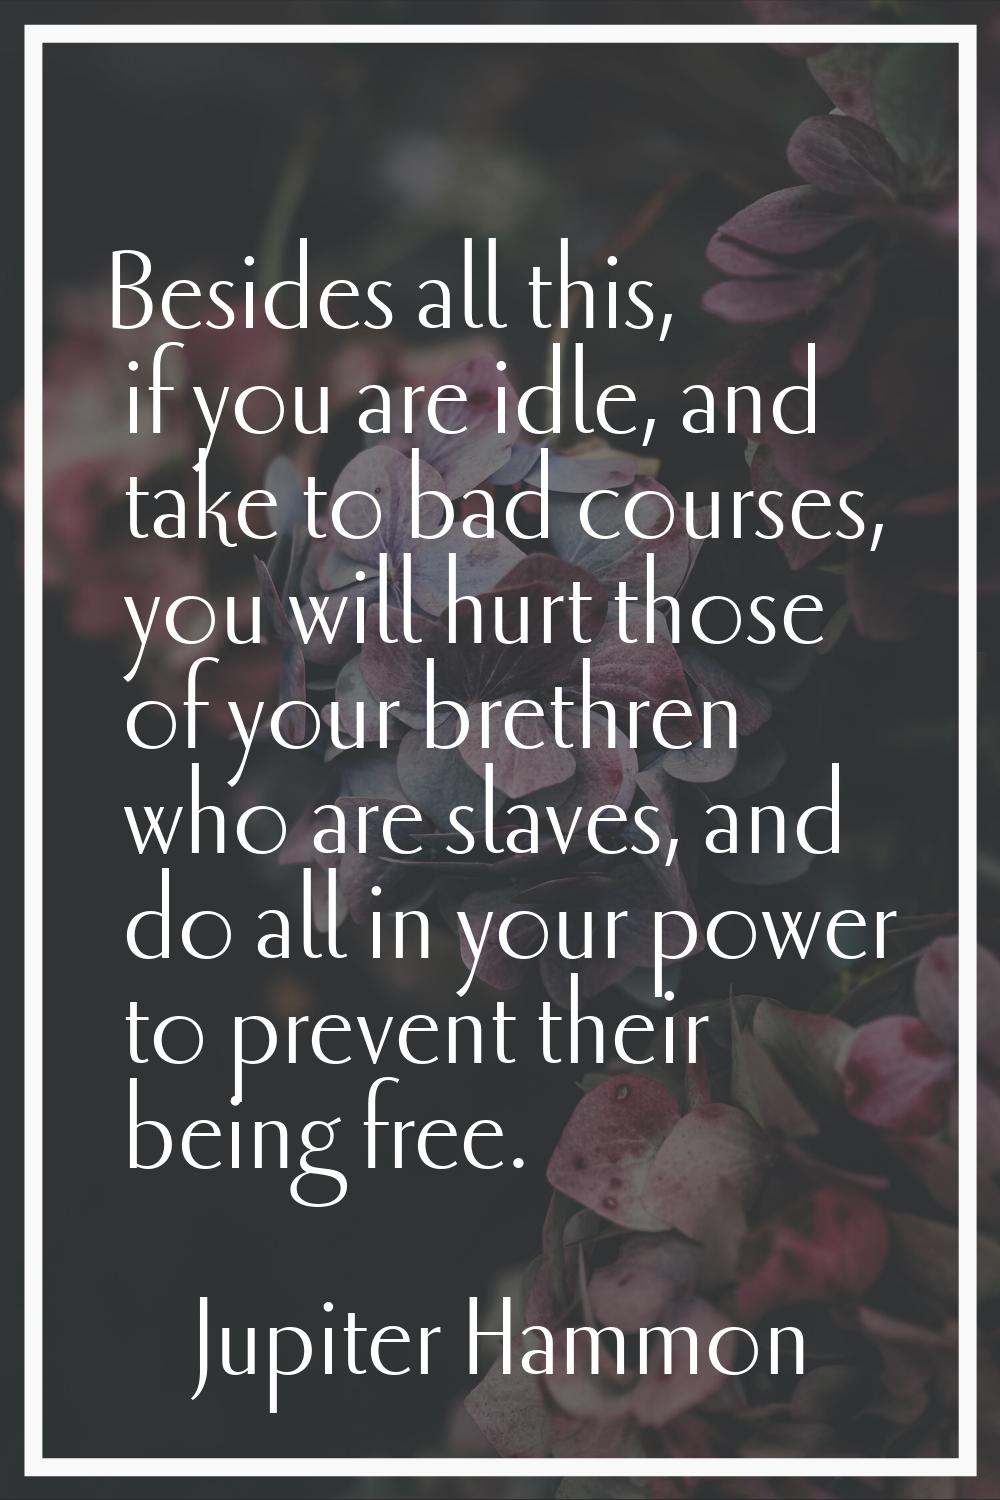 Besides all this, if you are idle, and take to bad courses, you will hurt those of your brethren wh